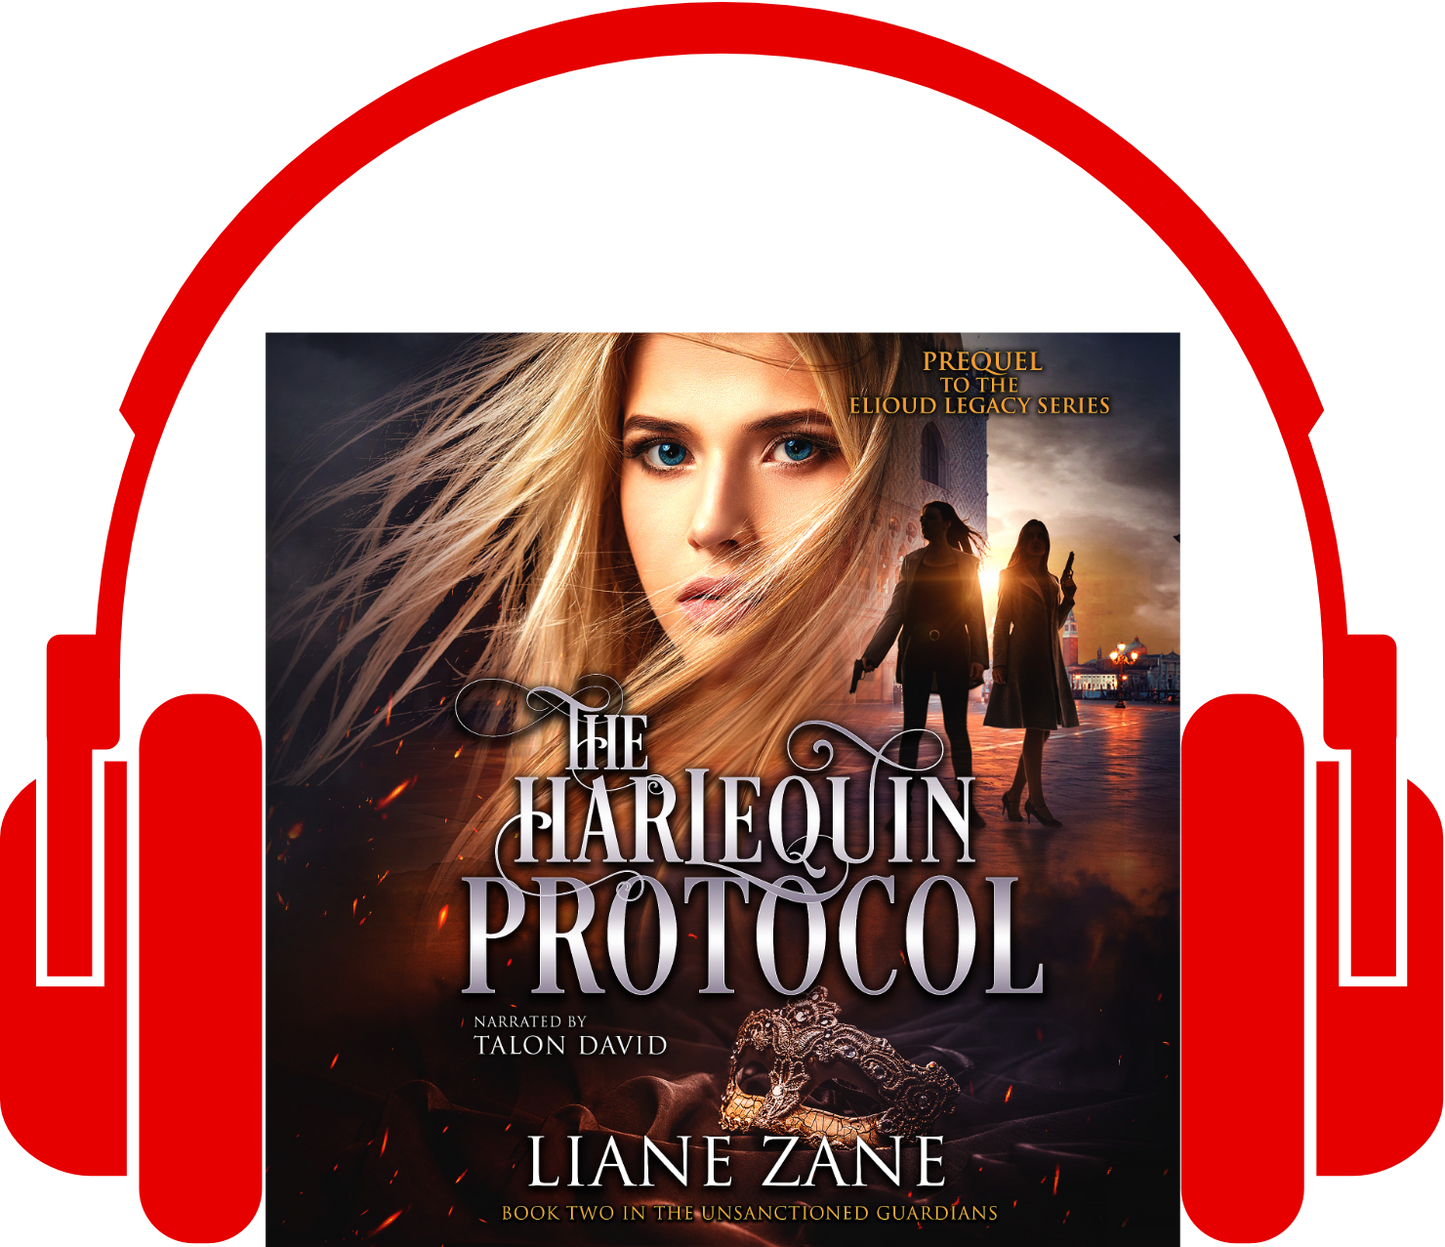 The Harlequin Protocol (The Unsanctioned Guardians Book 2)